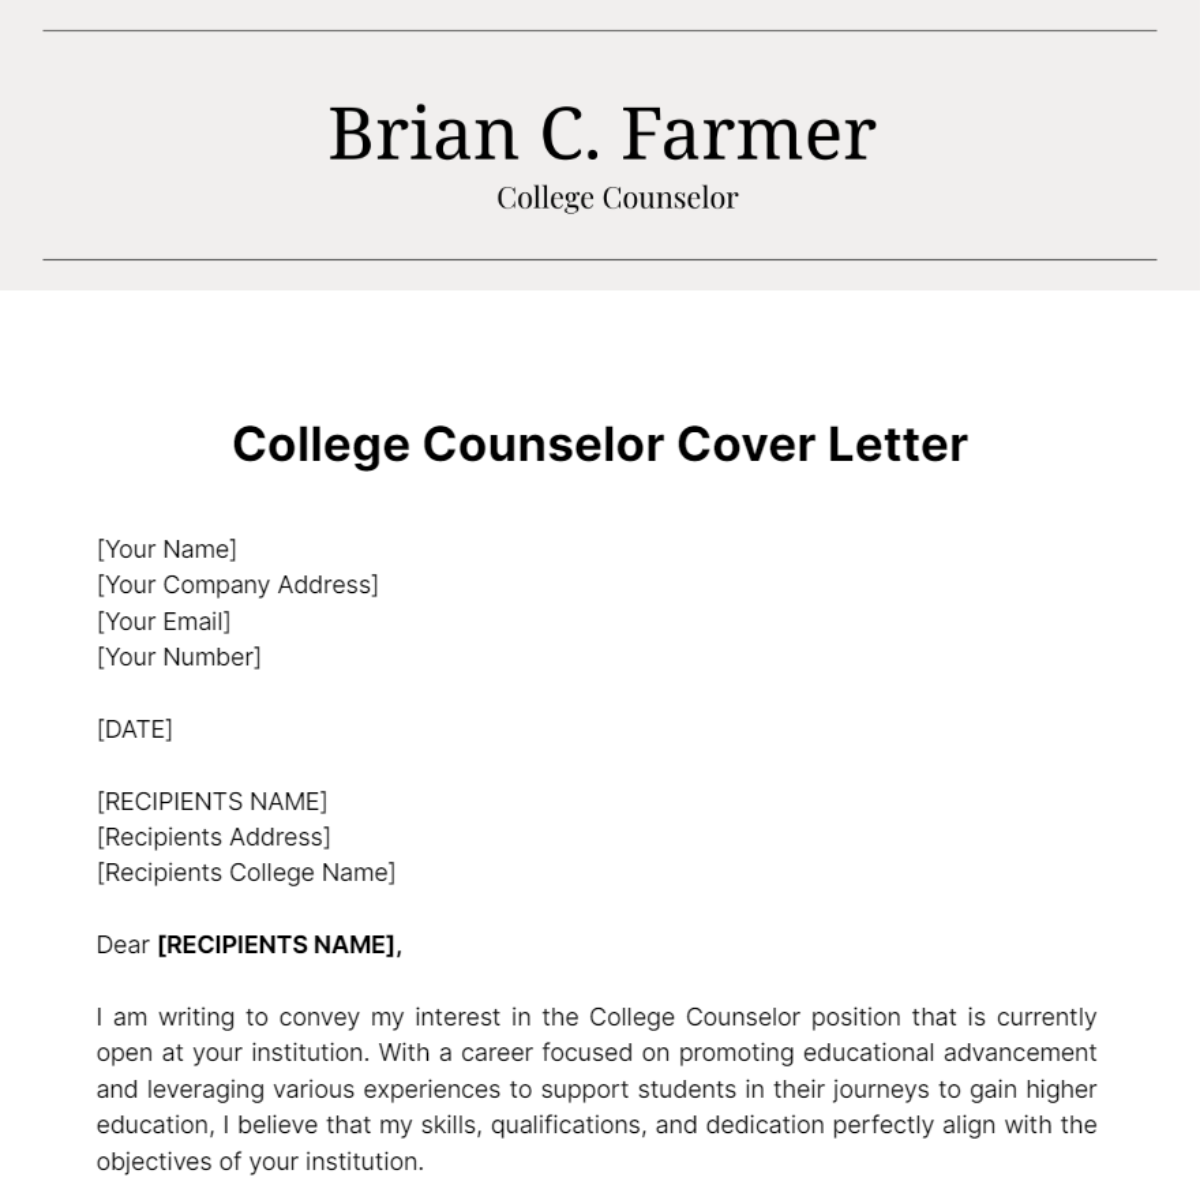 College Counselor Cover Letter Template